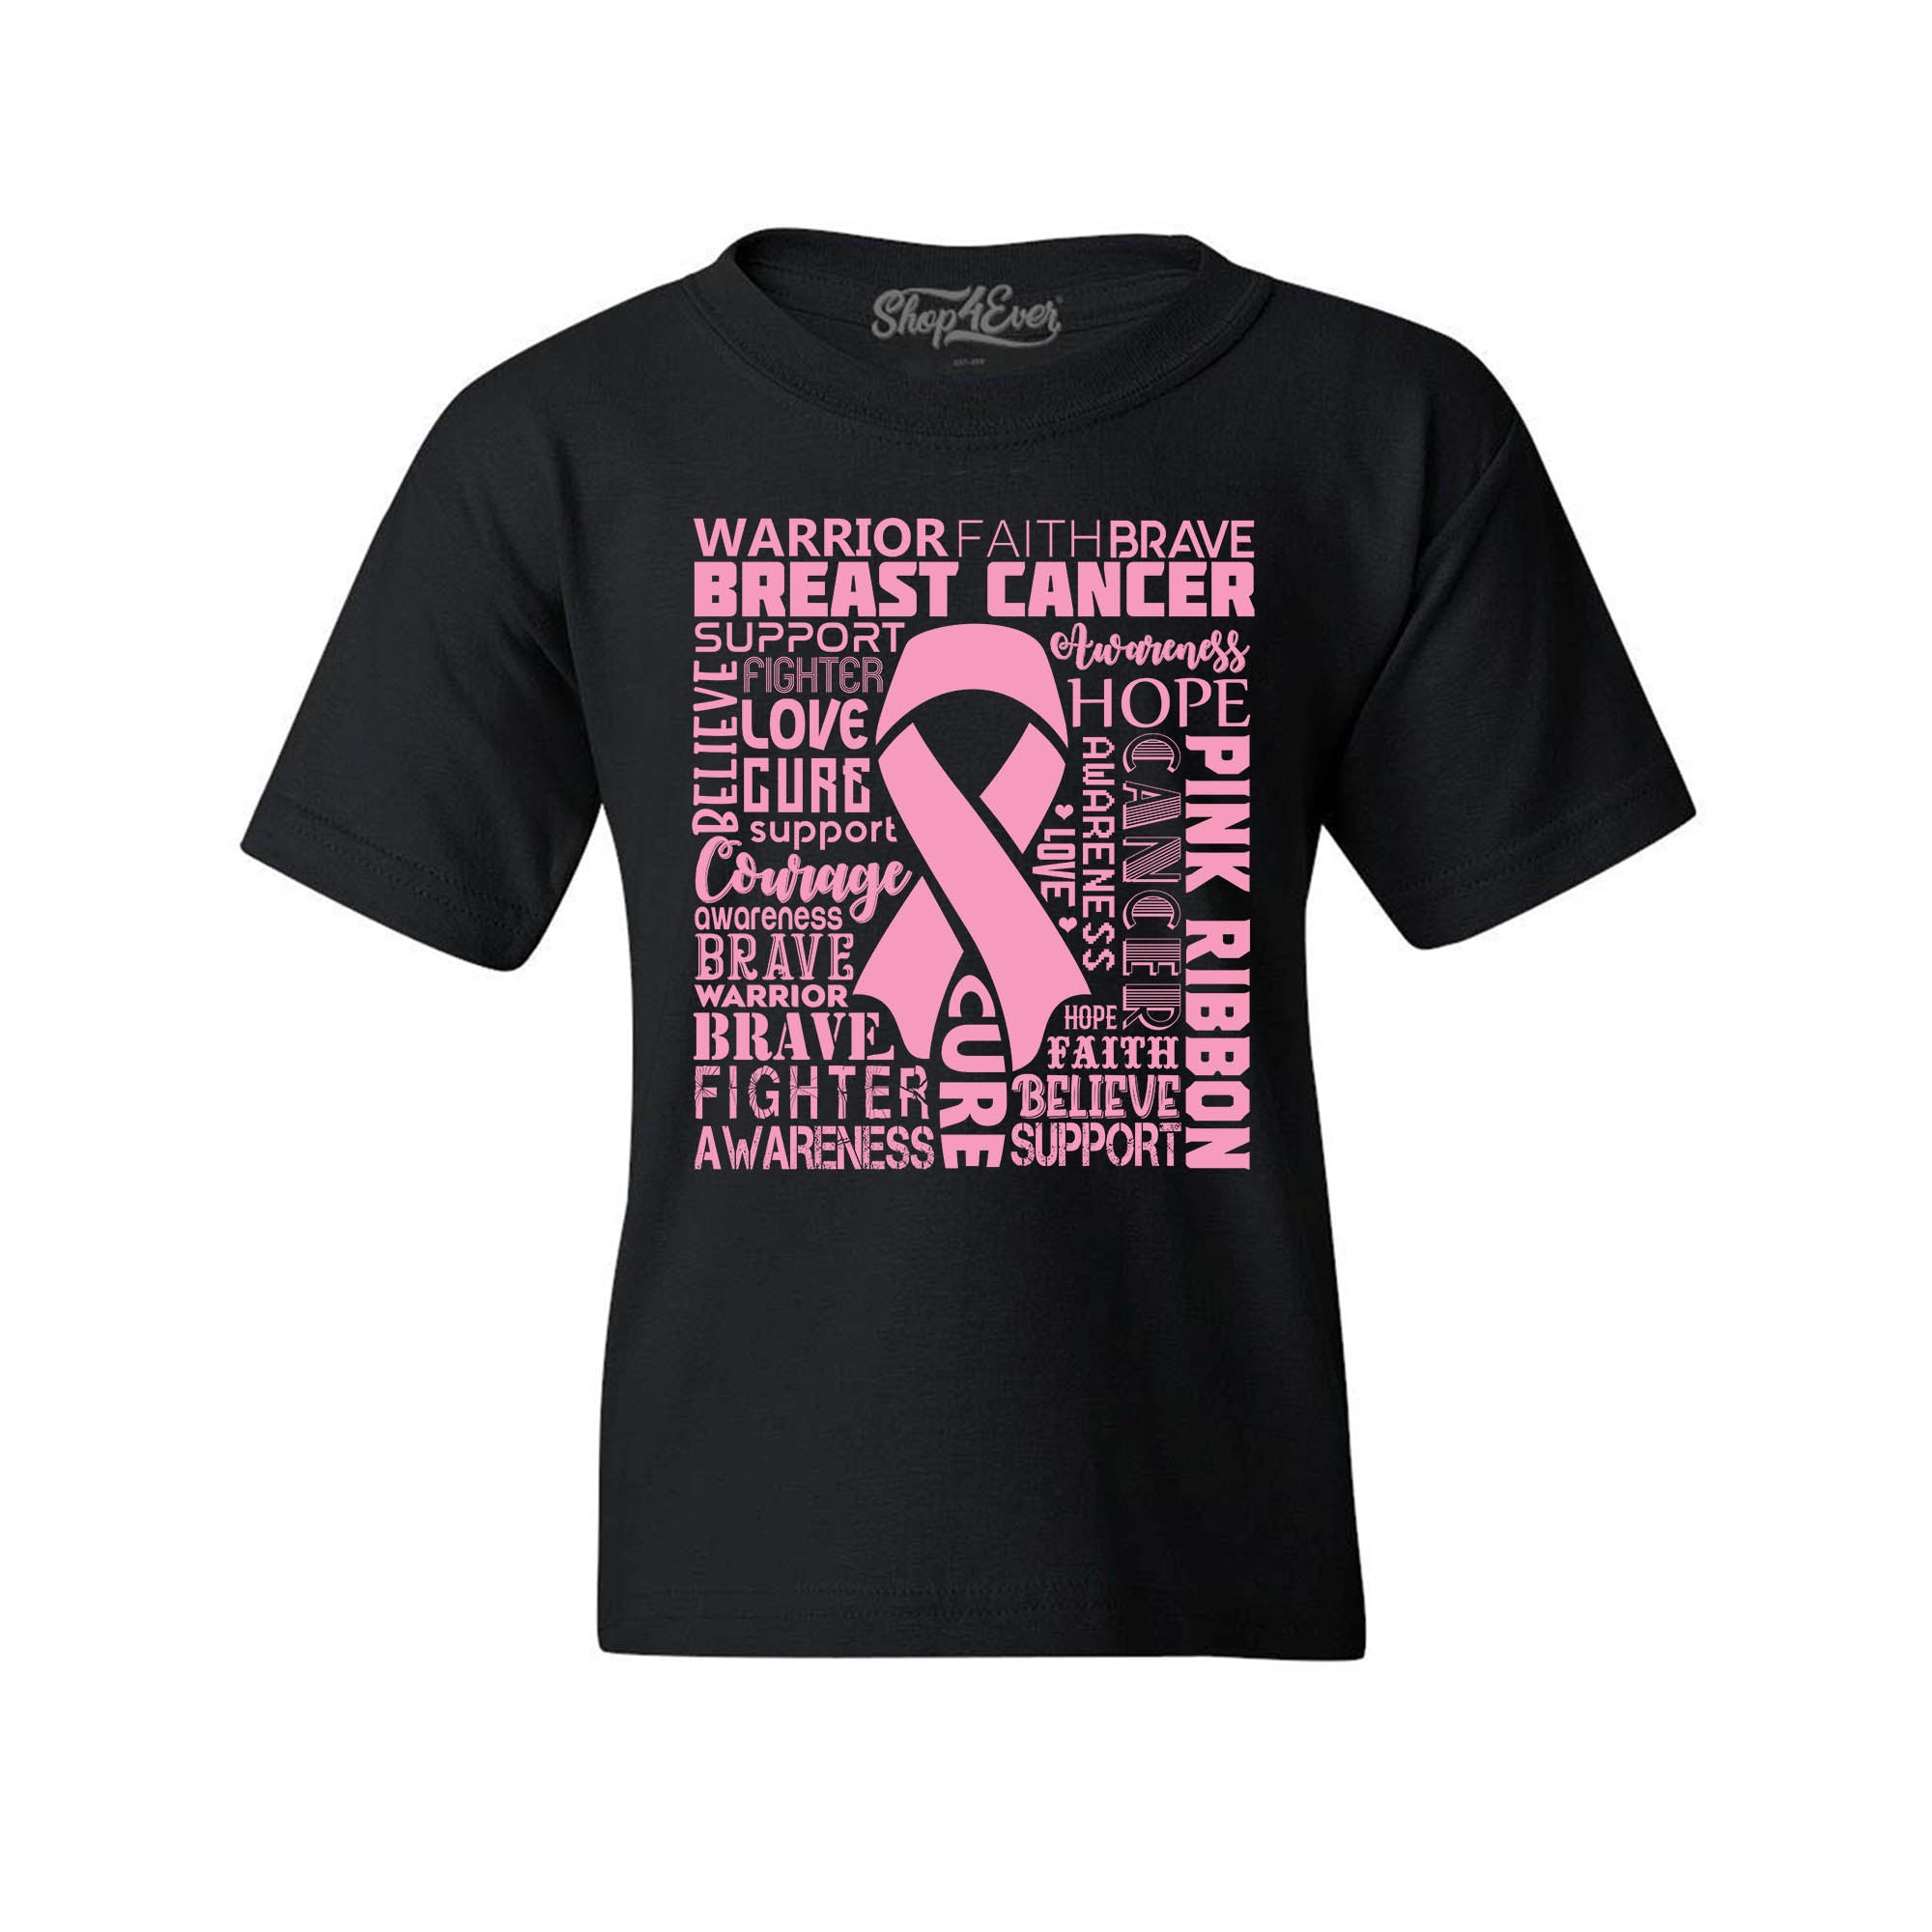 Breast Cancer Awareness Pink Ribbon Word Cloud Child's T-Shirt Kids Tee